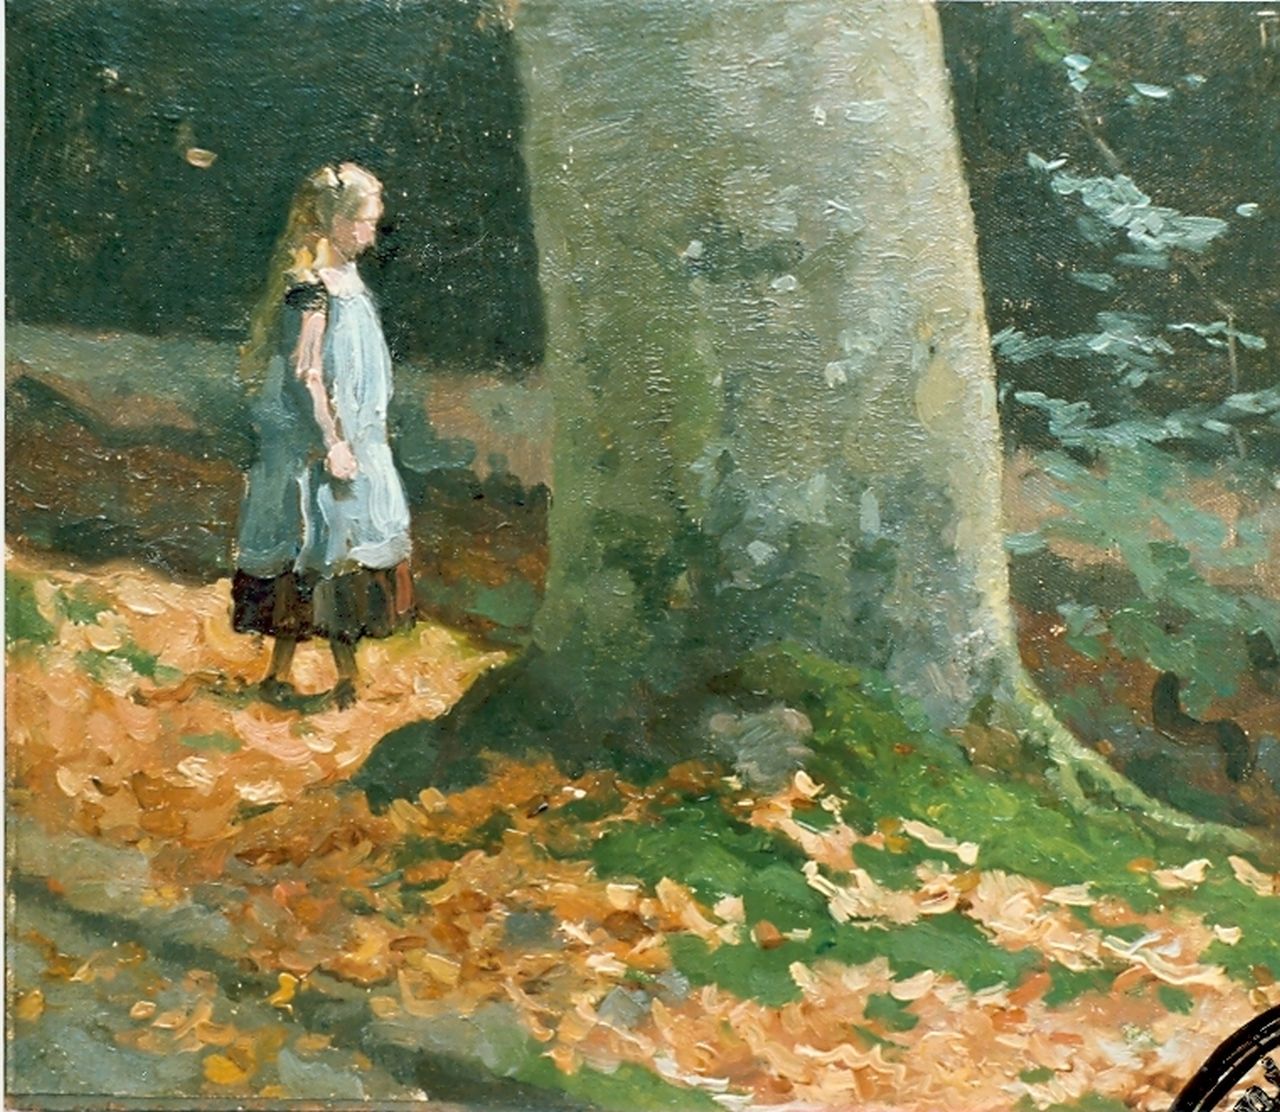 Tholen W.B.  | Willem Bastiaan Tholen, Young girl in a wooded landscape, oil on canvas laid down on panel 21.3 x 26.2 cm, signed u.r.